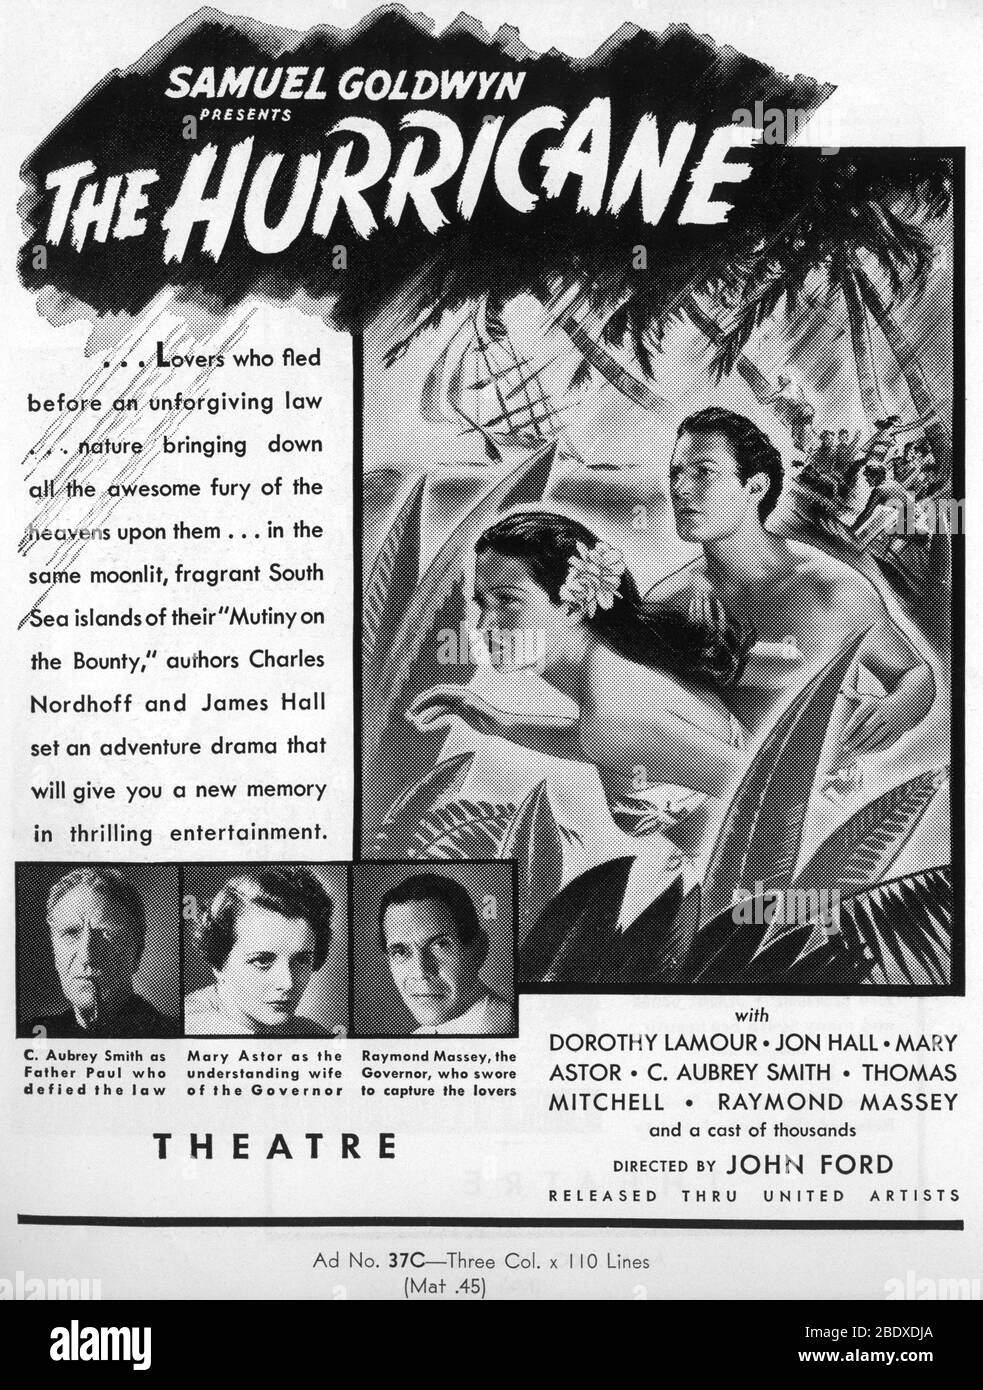 DOROTHY LAMOUR JON HALL C. AUBREY SMITH MARY ASTOR and RAYMOND MASSEY in THE HURRICANE 1937 director JOHN FORD  novel Charles Nordhoff and James Norman Hall special effects James Basevi The Samuel Goldwyn Company / United Artists Stock Photo